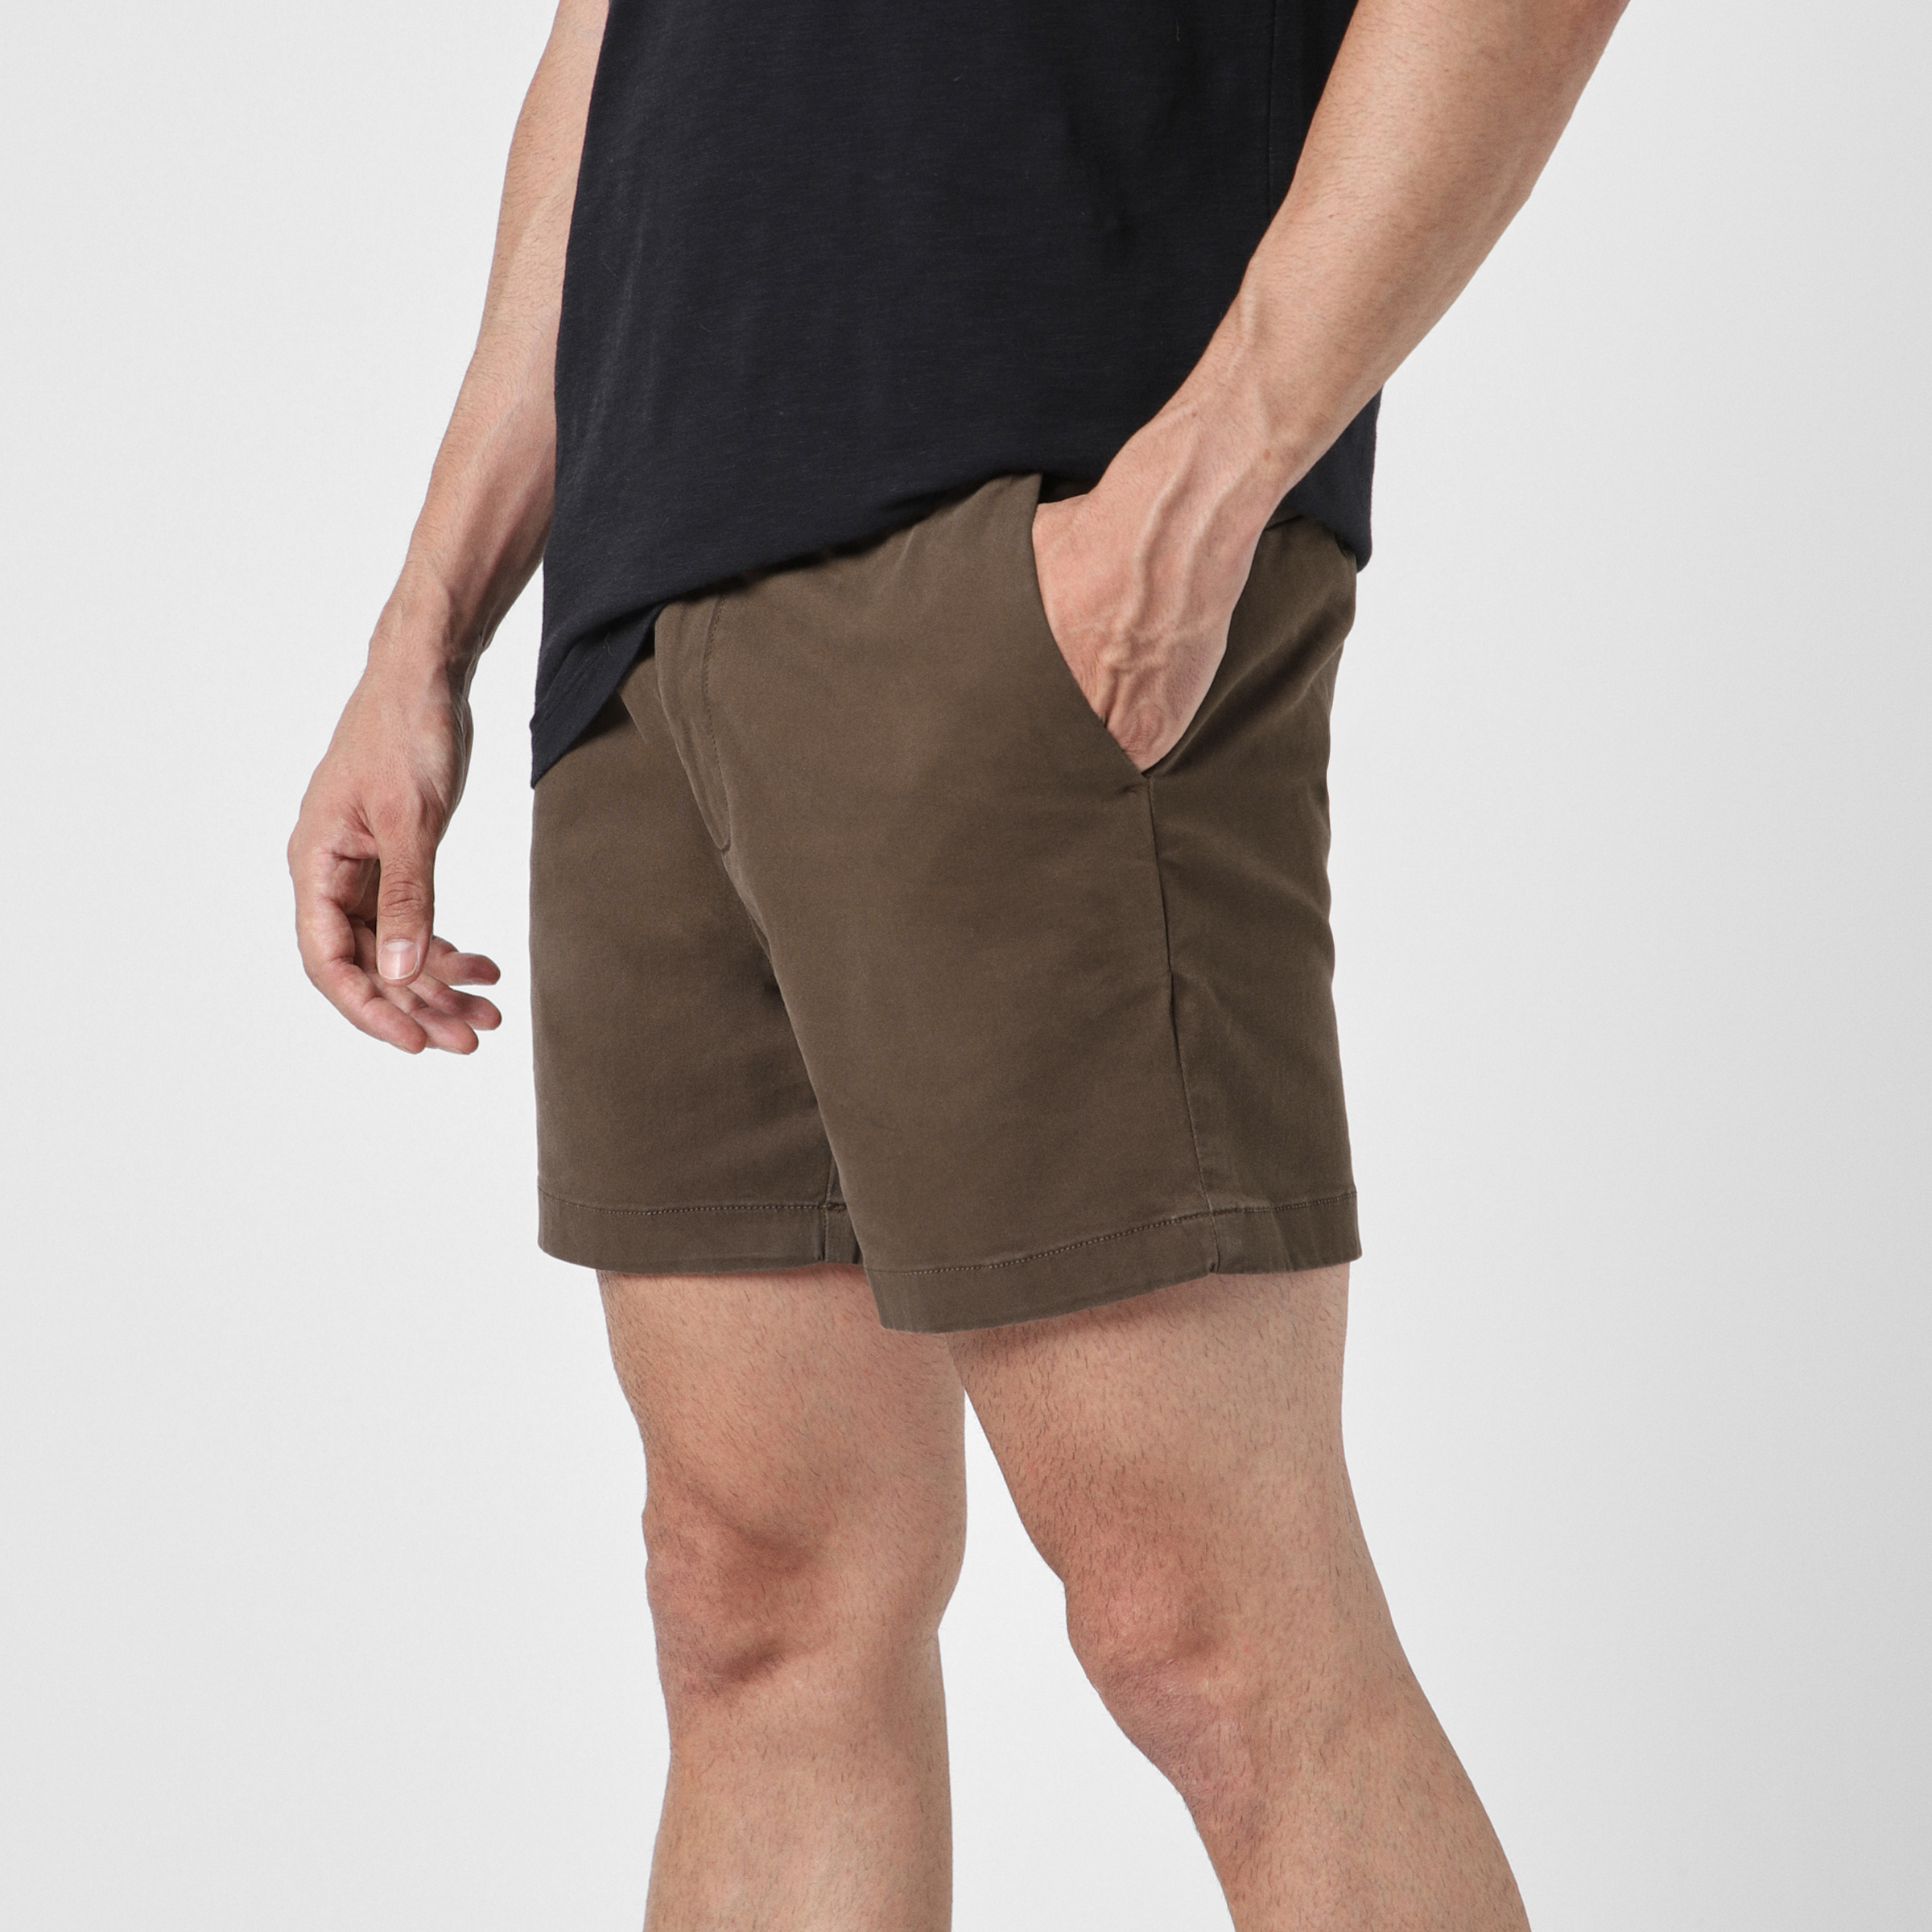 Stretch Chino Short 5.5" in Cocoa left side on model